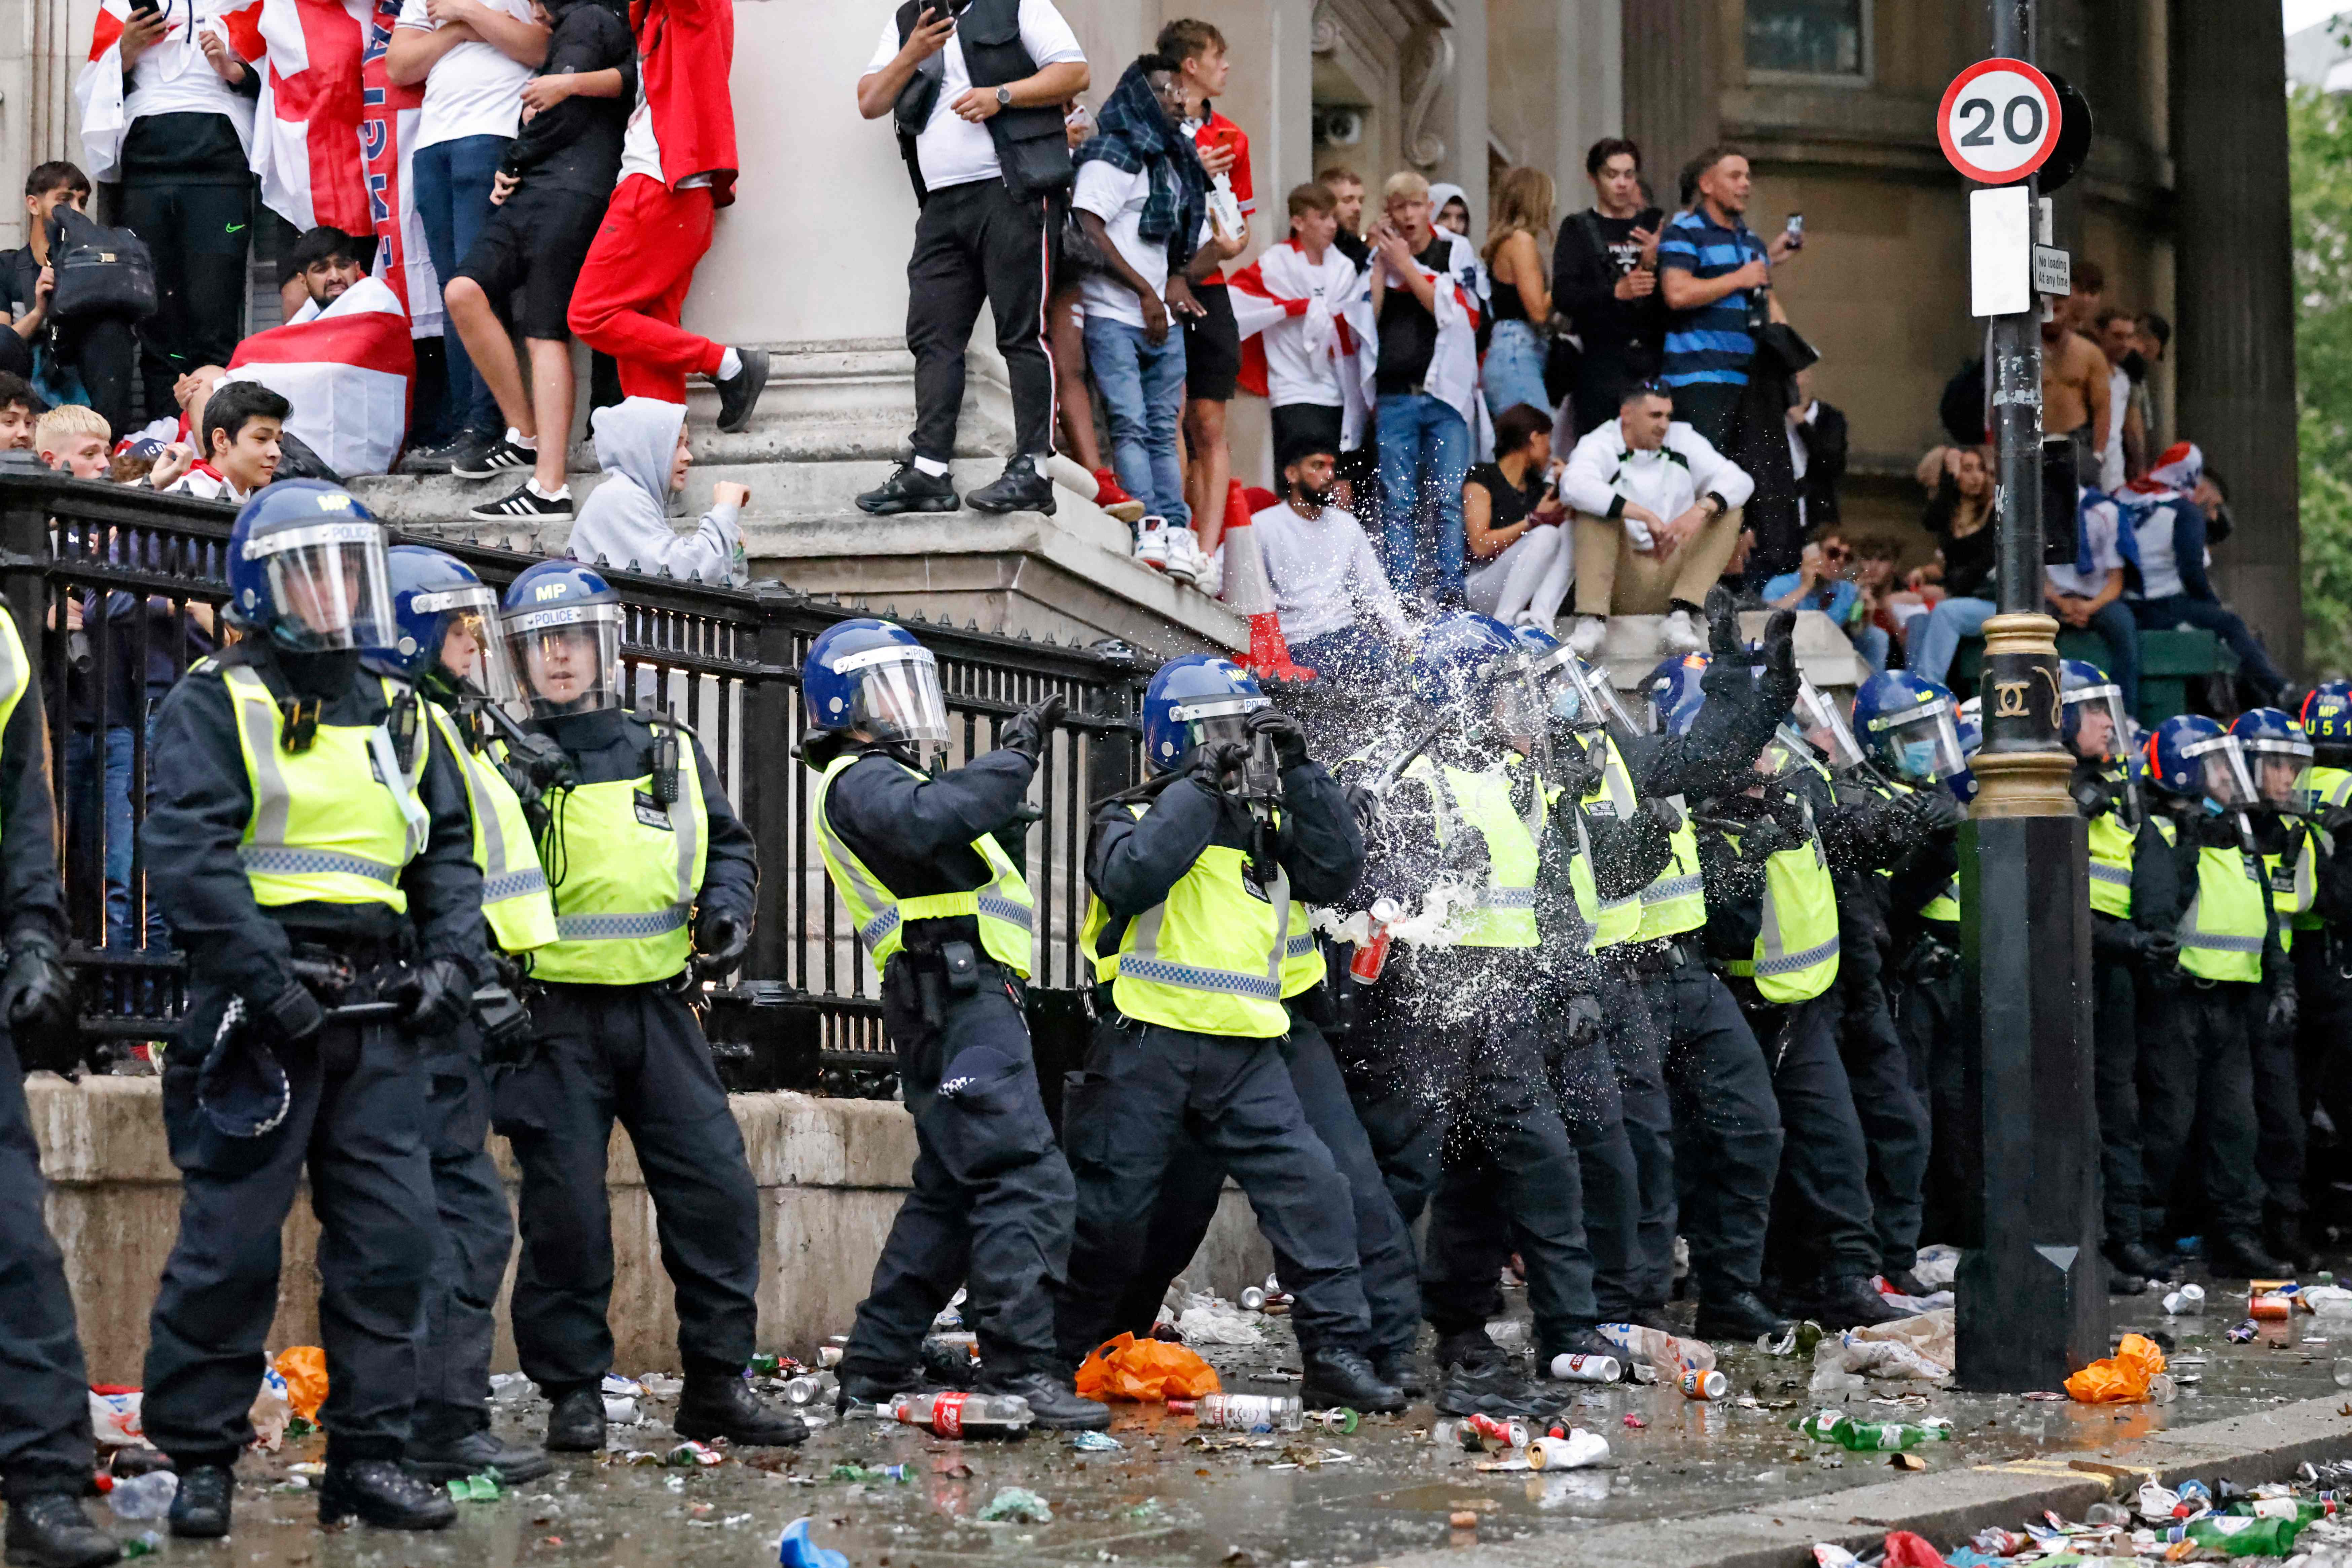 A line of police officers are the target of beer can throwers as England supporters stand around the edges of Trafalgar Square during a live screening of the UEFA Euro 2020 final football match between England and Italy in central London on 11 July, 2021.